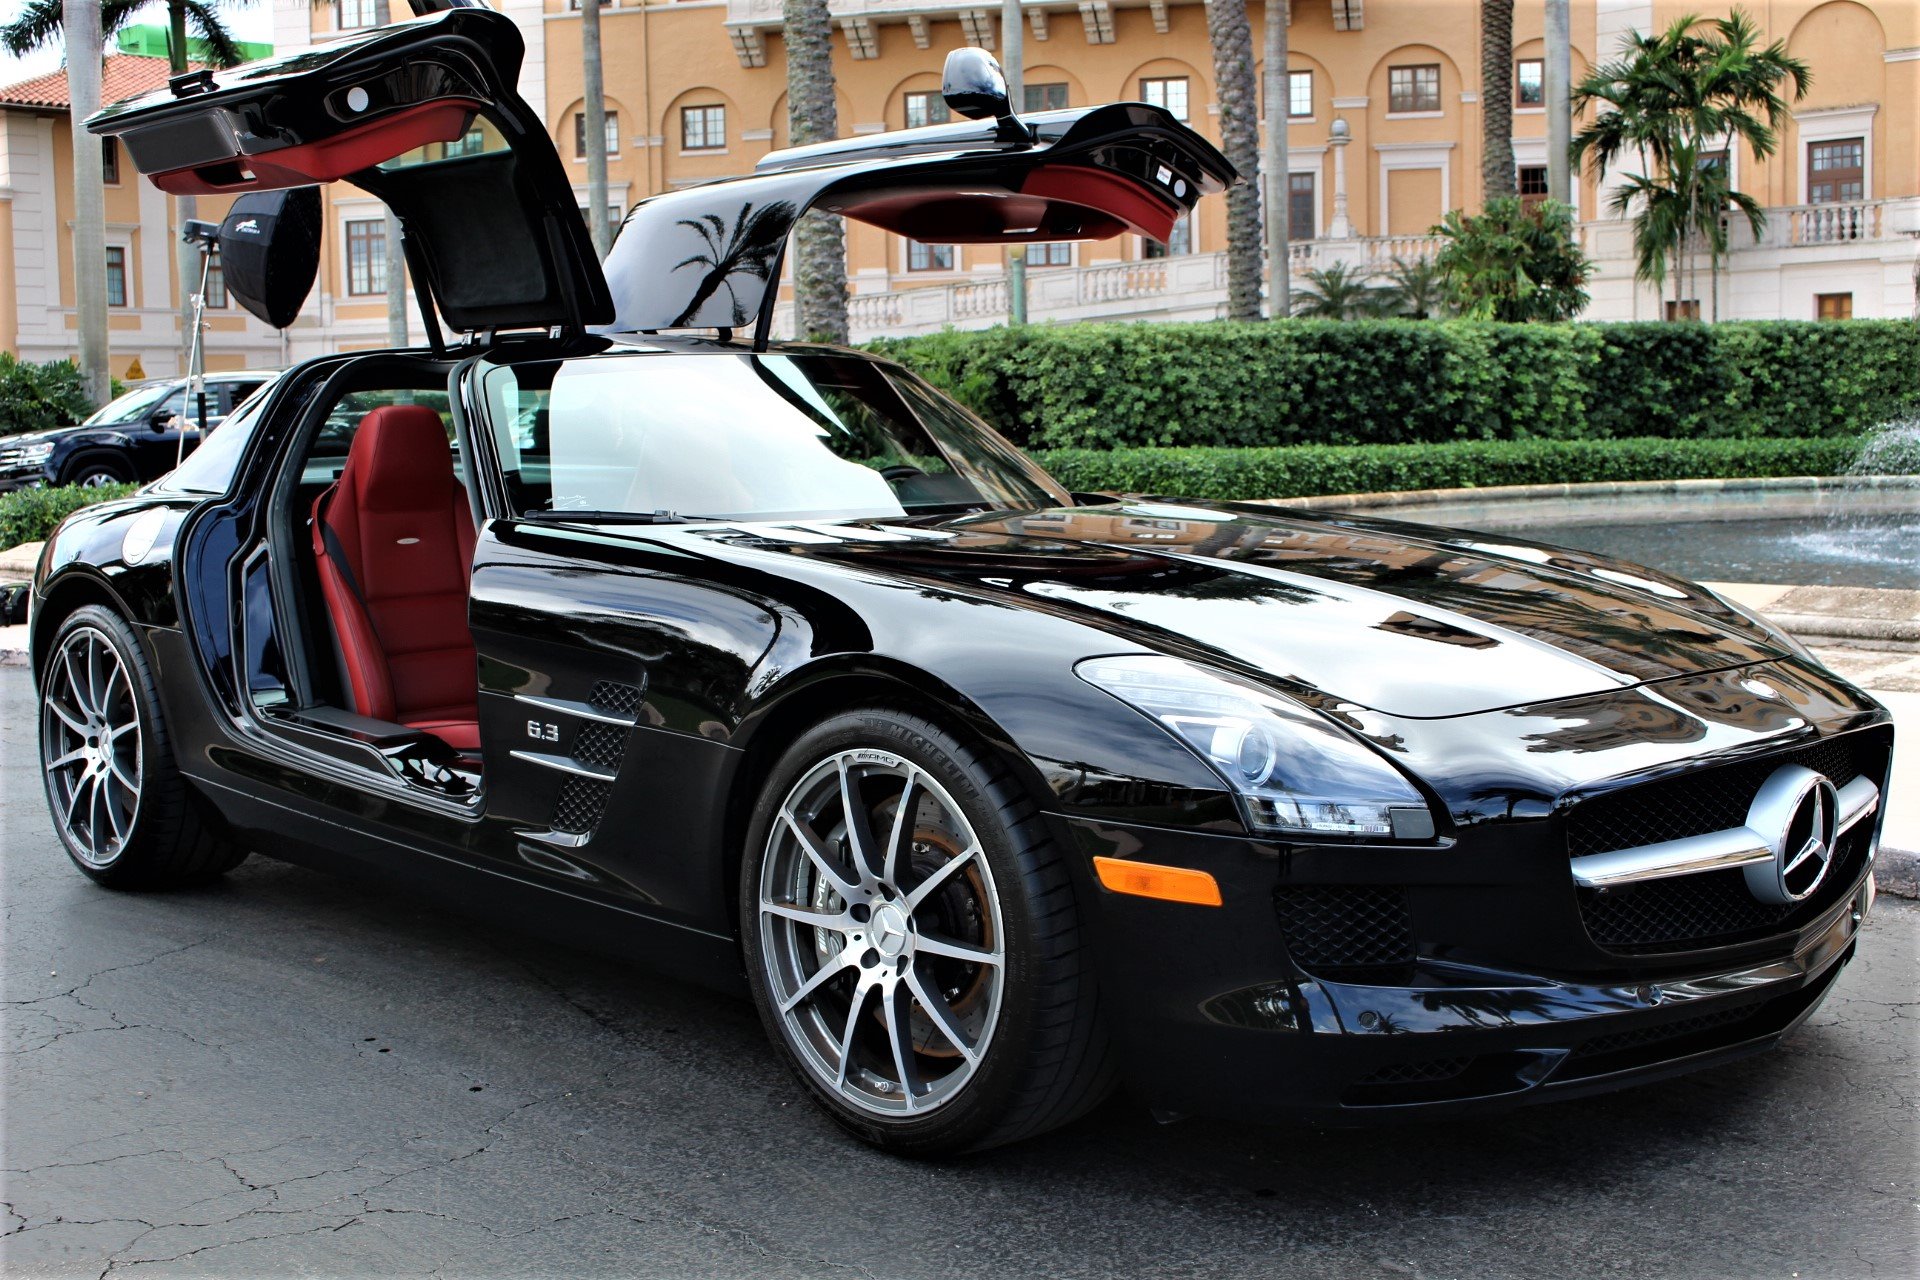 Used 2011 Mercedes-Benz SLS AMG for sale Sold at The Gables Sports Cars in Miami FL 33146 3